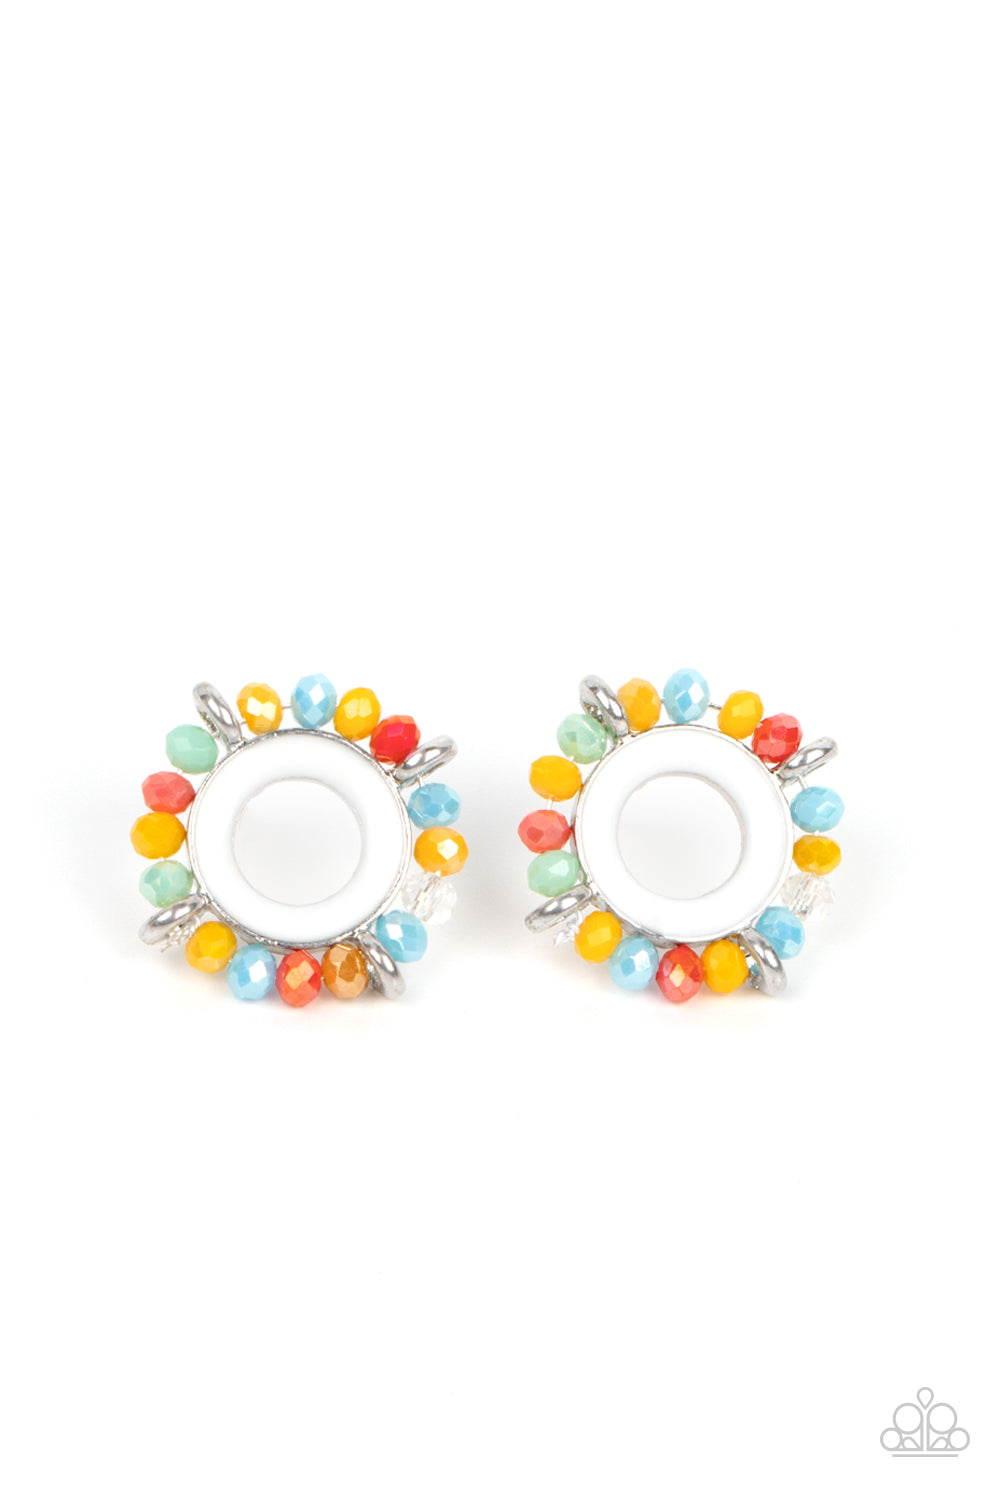 Paparazzi Accessories Nautical Notion - Multi Featuring dainty silver accents, a ring of multicolored crystal-like beads encircles a silver ring painted in a shiny white finish for a nautical inspired look. Earring attaches to a standard post fitting. Sol